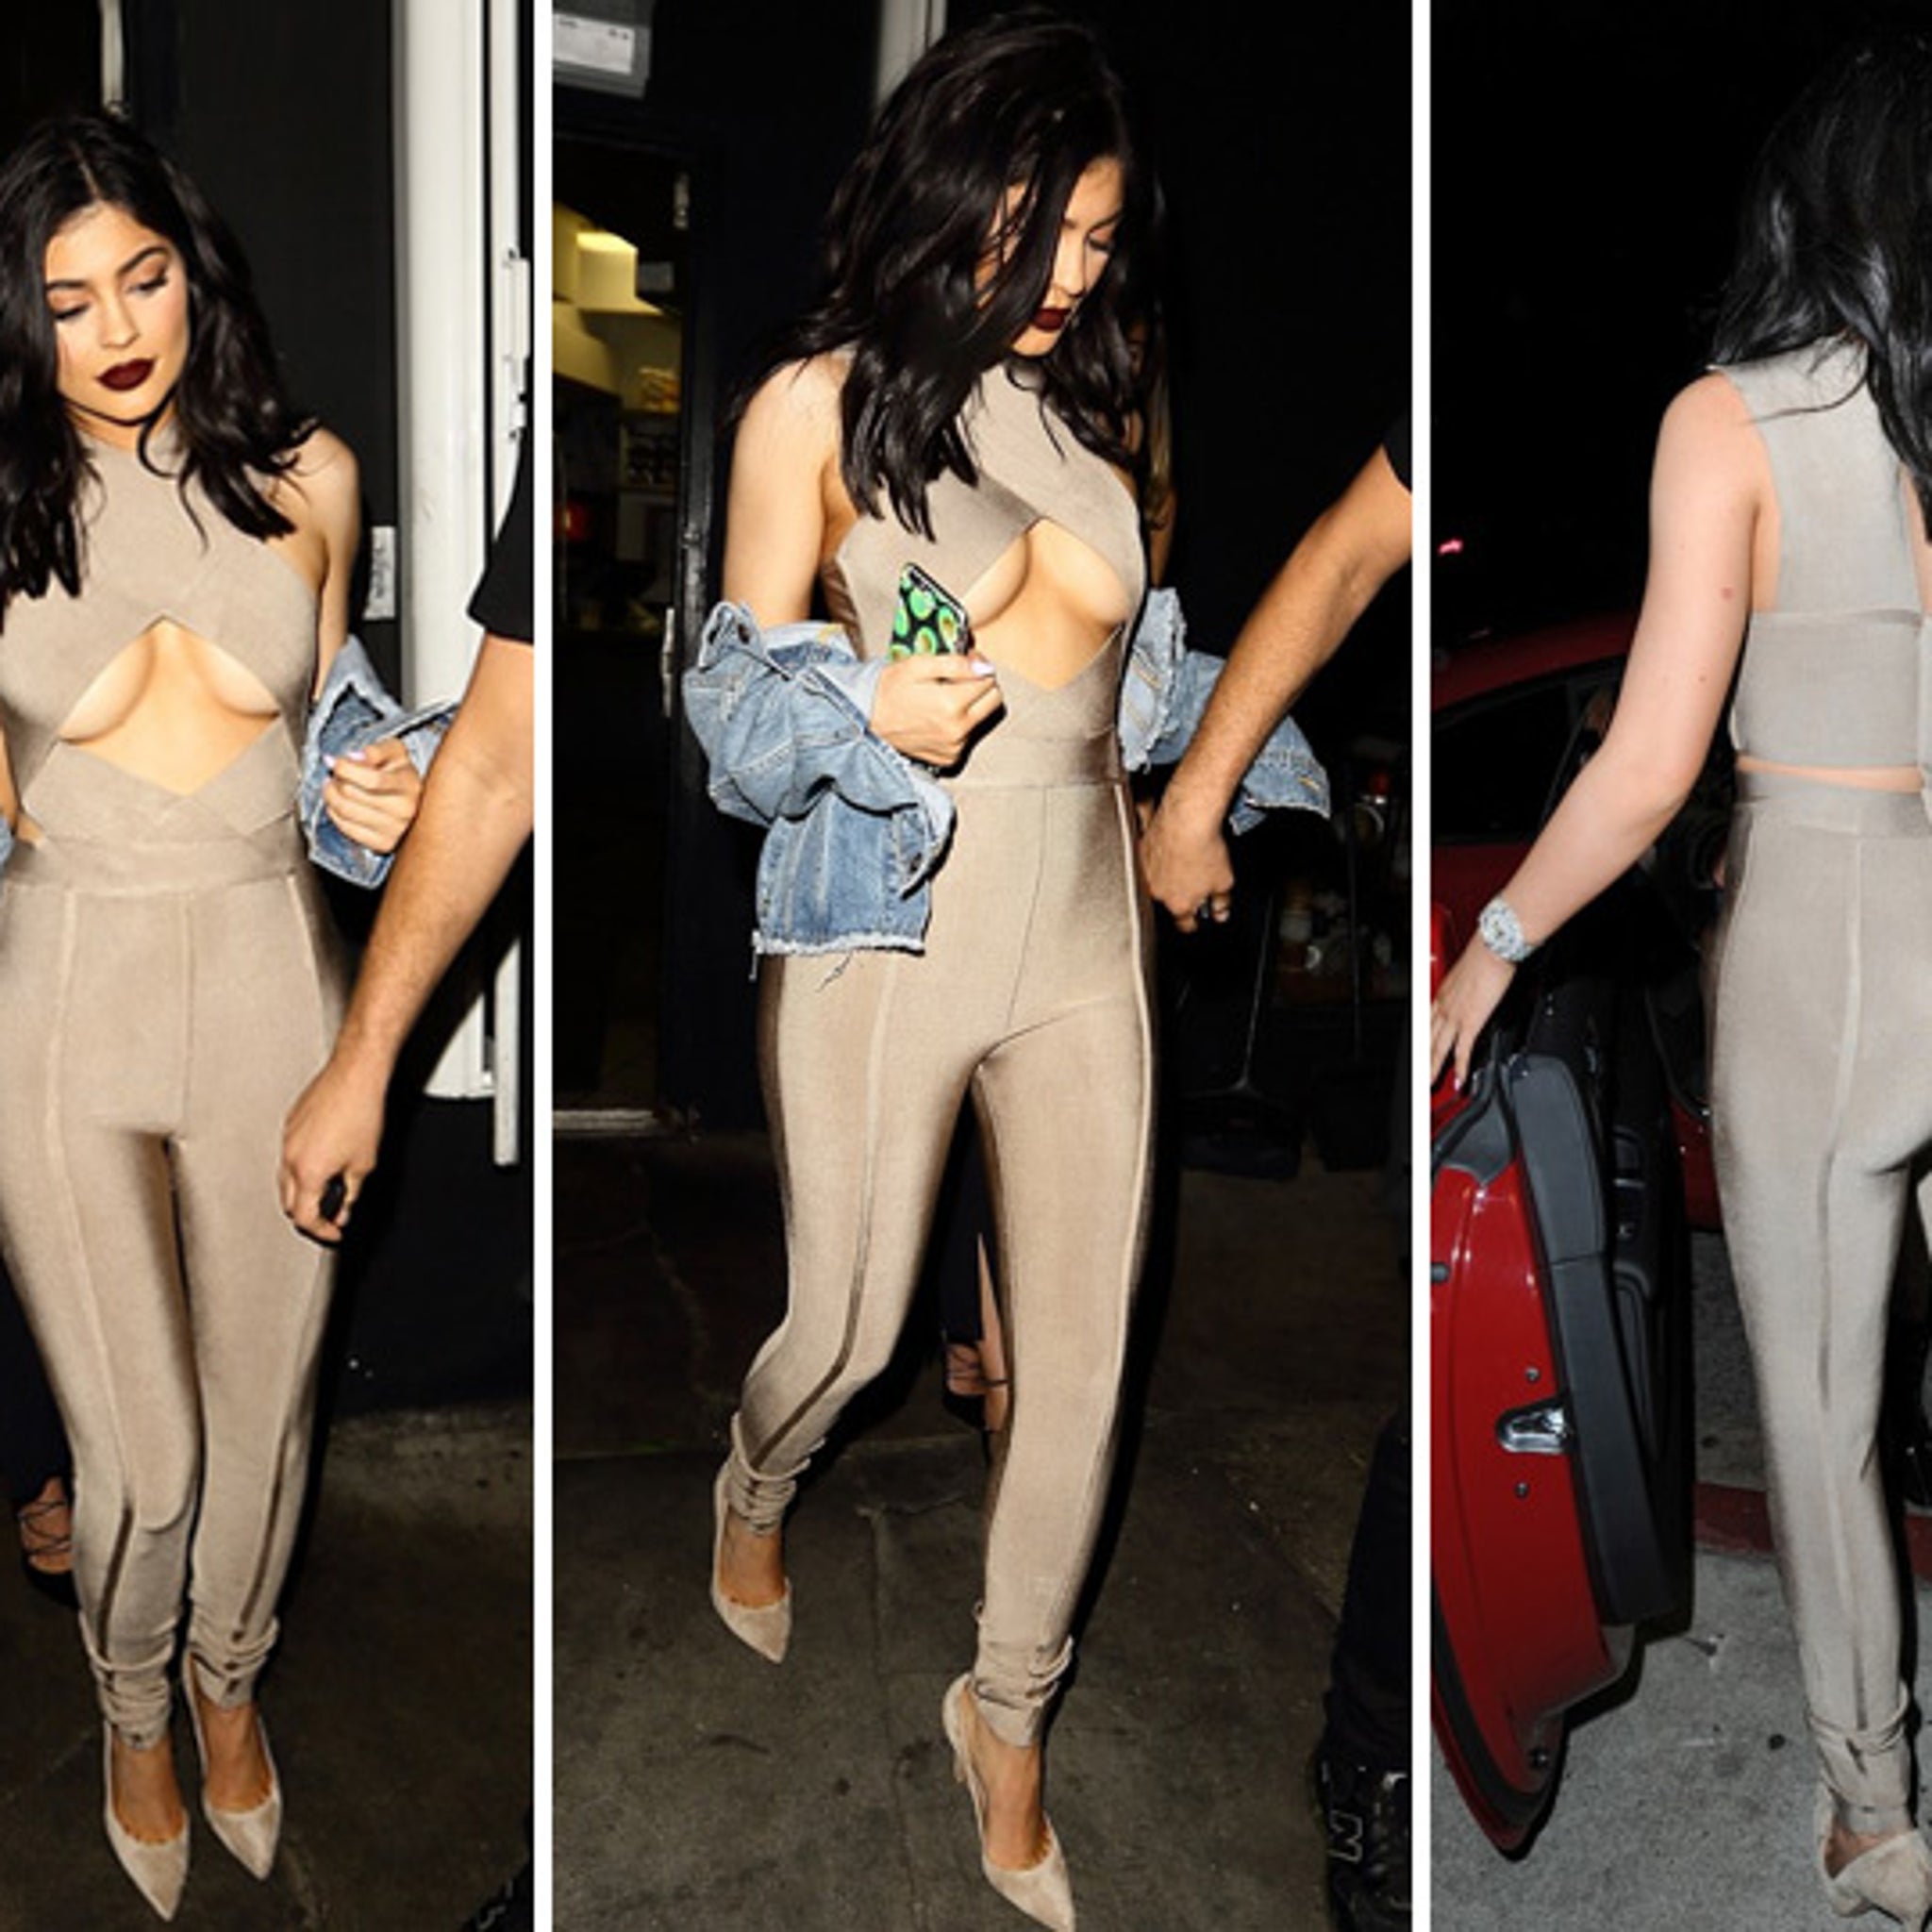 Kylie Jenner Stuns at Paris Fashion Week, Haters Call Her 'Old' Looking